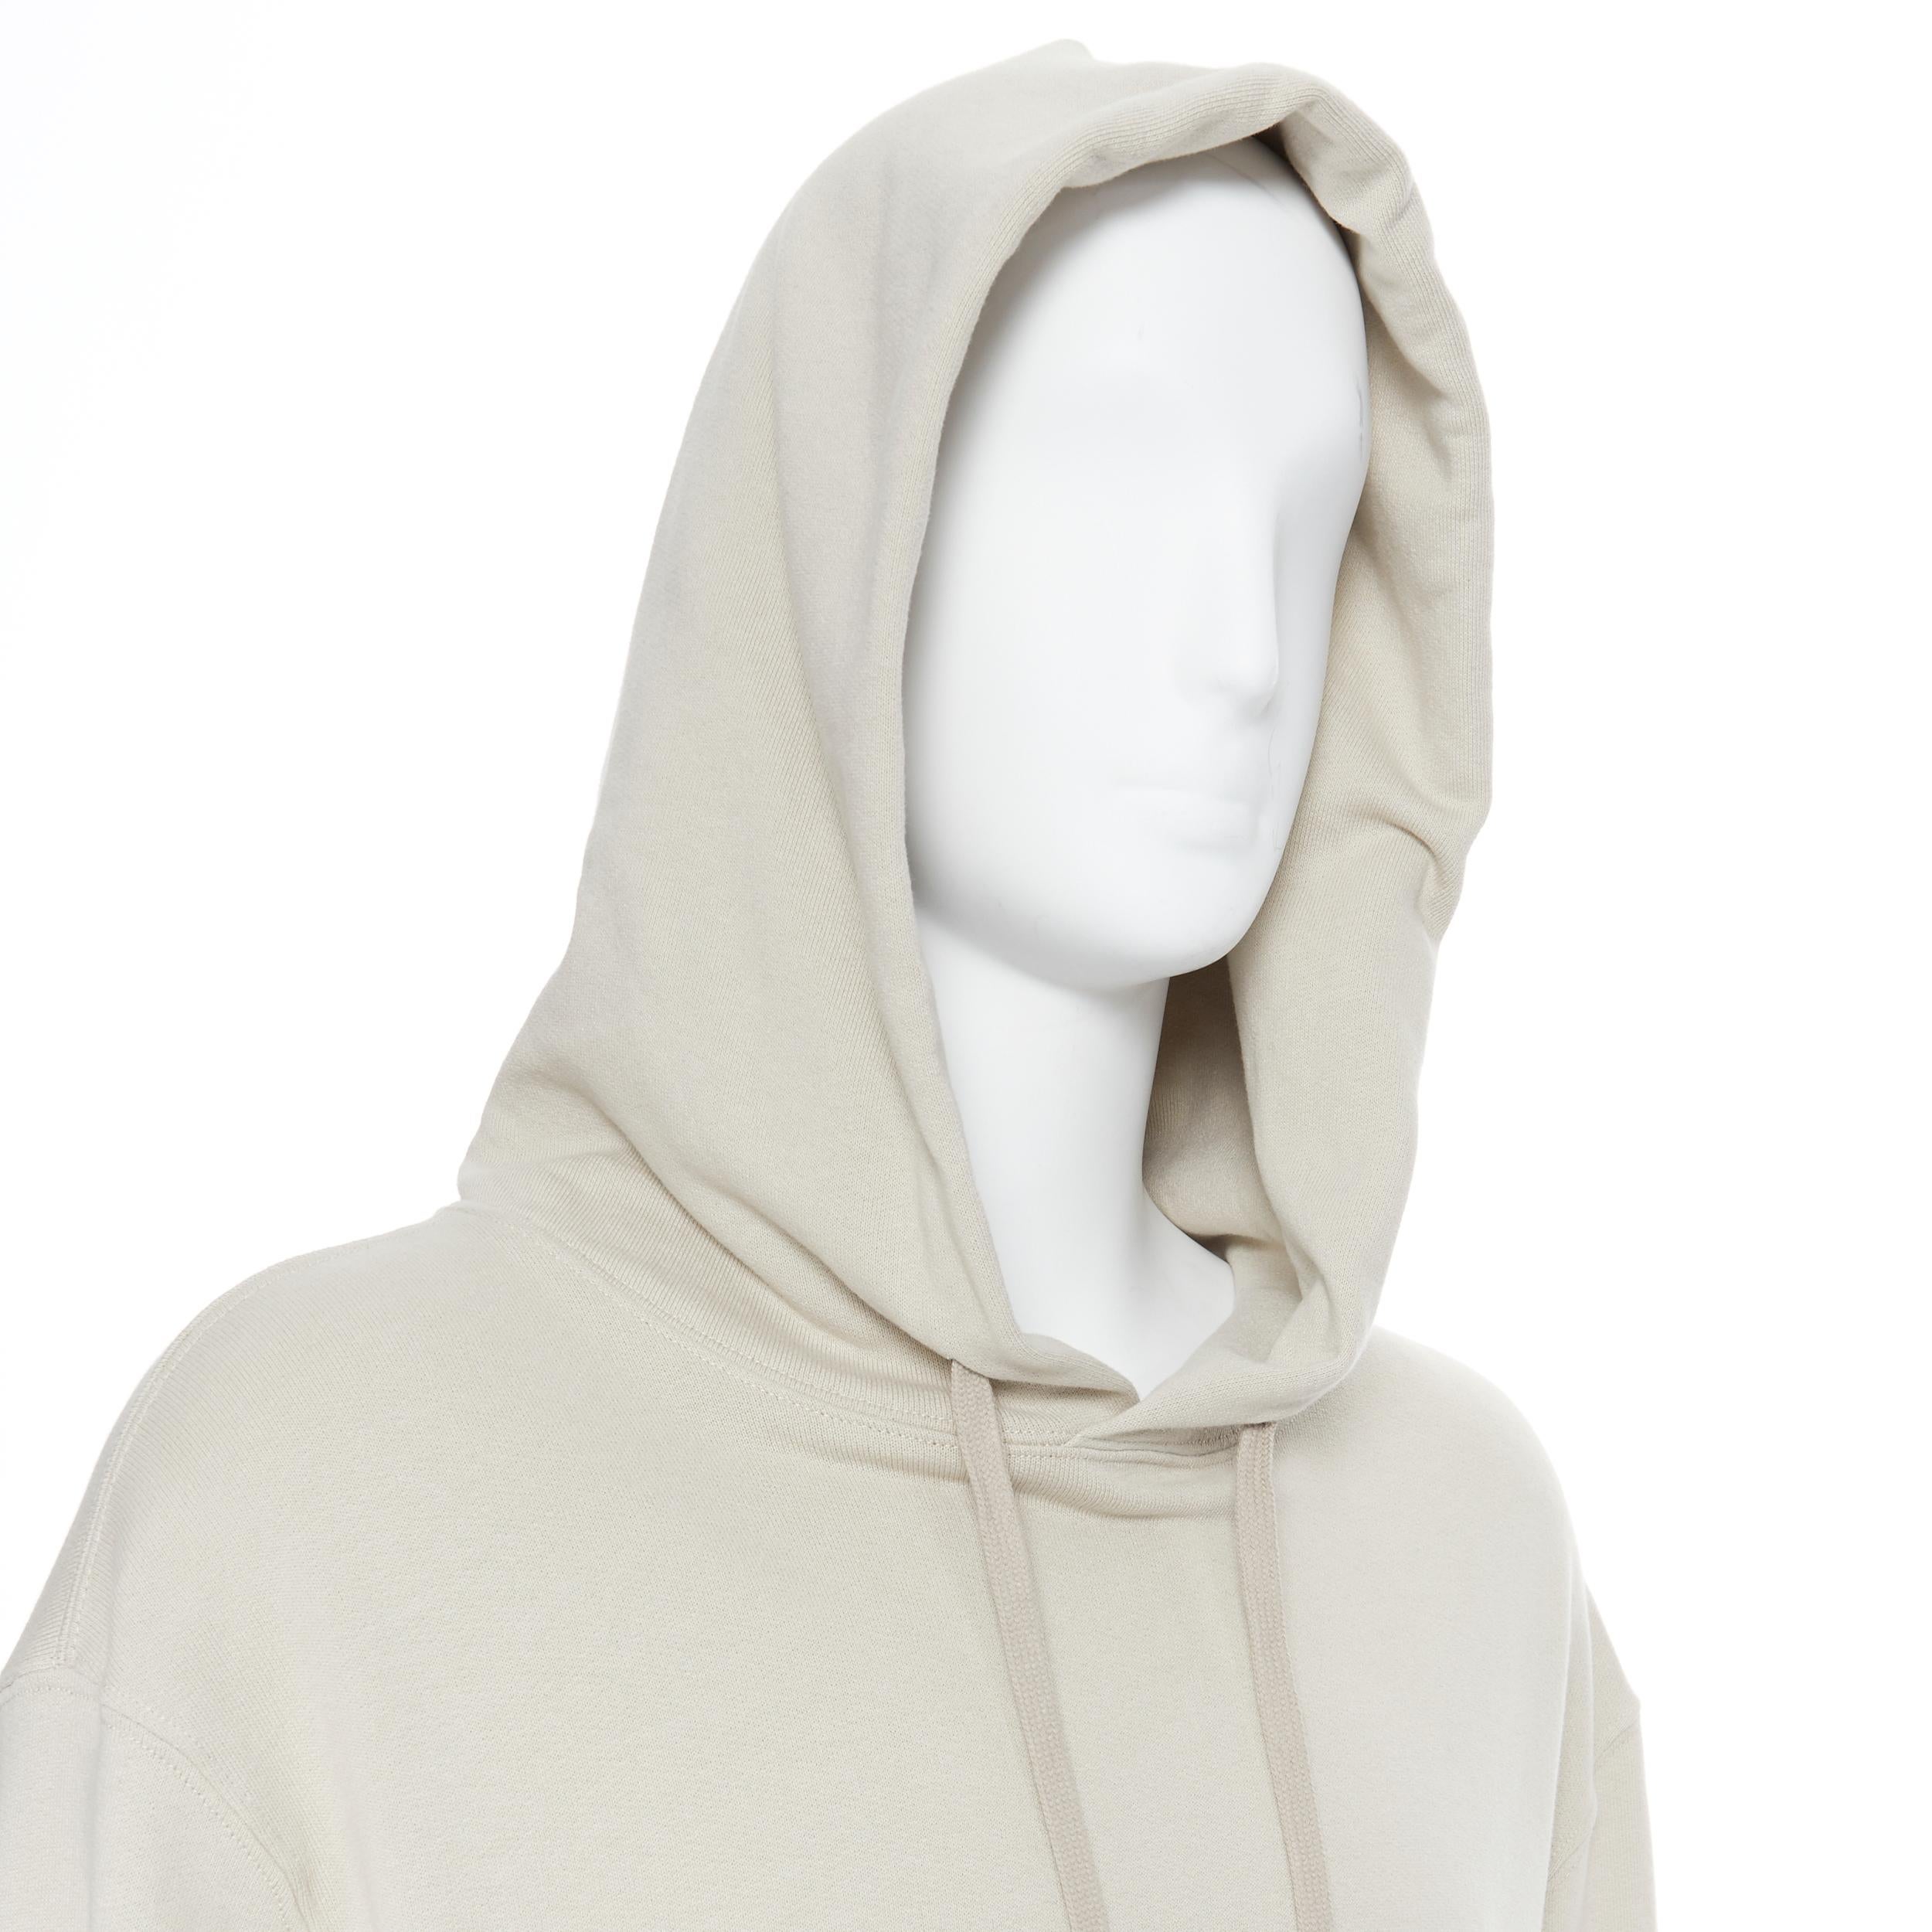 new RICK OWENS CHAMPION SS20 Tecuatl Pearl Pentagram star oversized hoodie S
Brand: Rick Owens
Designer: Champion
Collection: SS2020
Model Name / Style: Pentagram hoodie
Material: Cotton
Color: Grey; Pearl
Pattern: Solid
Extra Detail: Embroidery